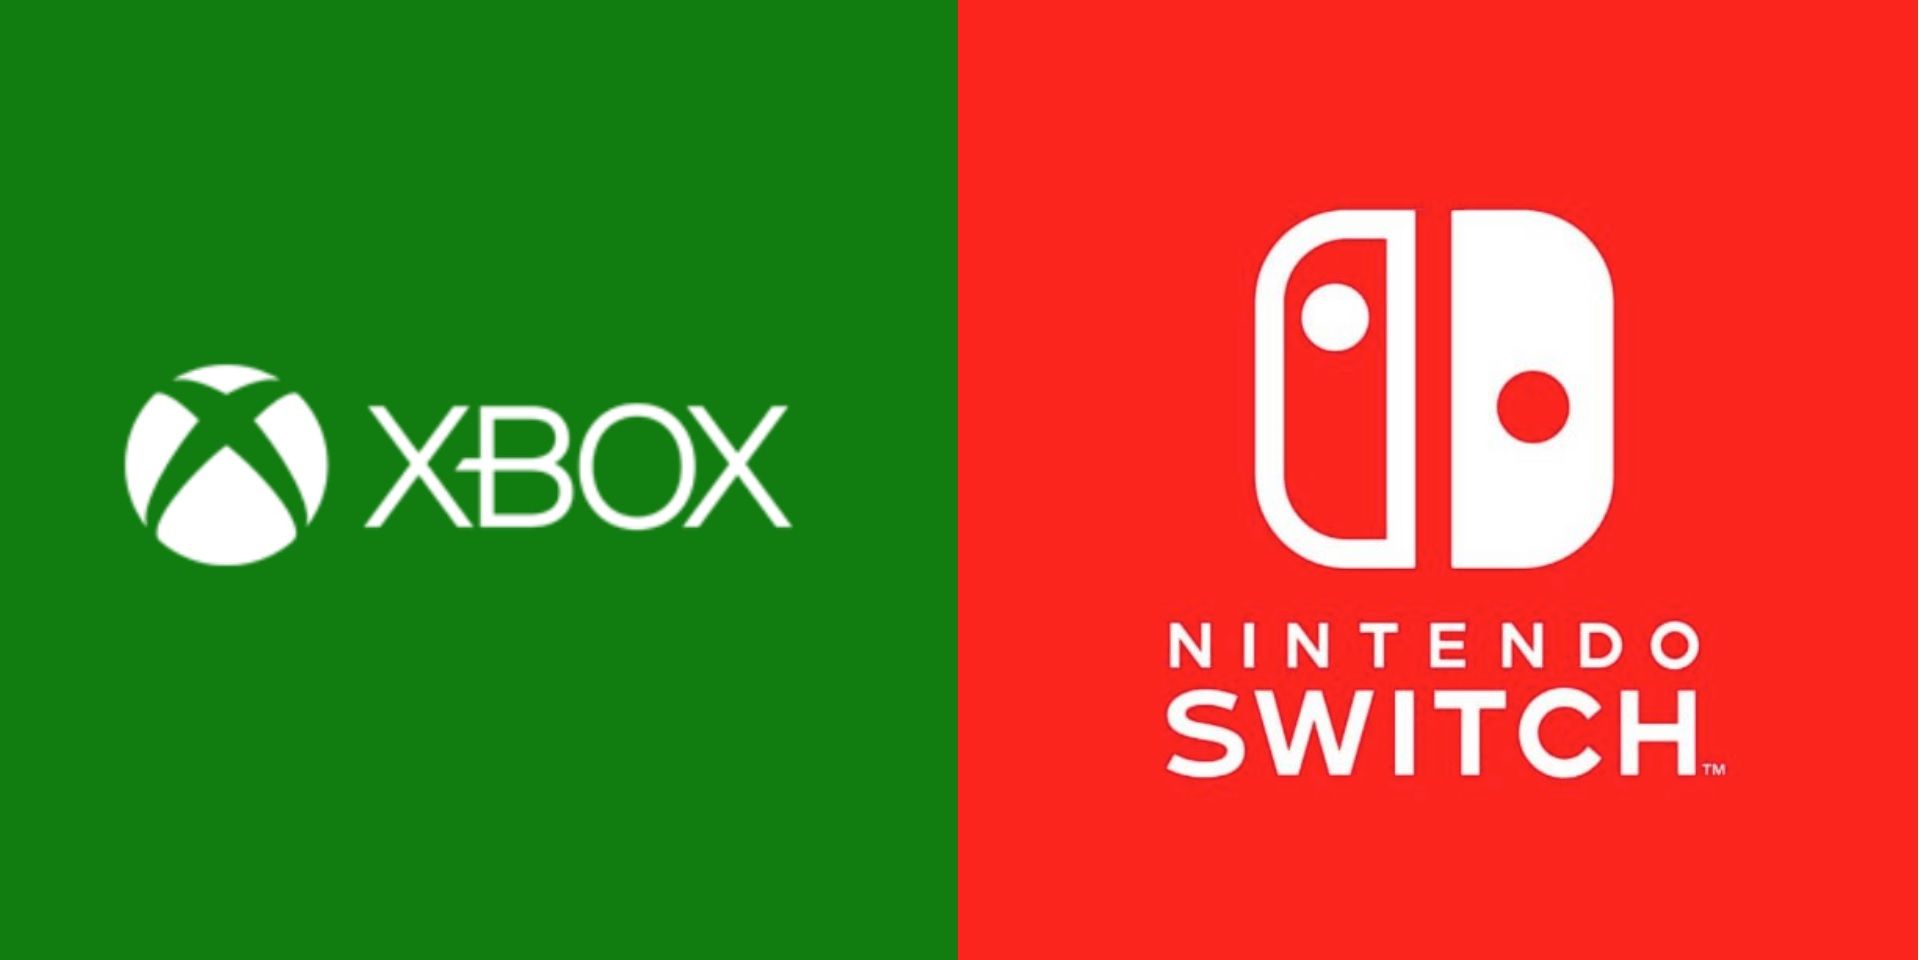 The Xbox and Nintendo Switch logos.